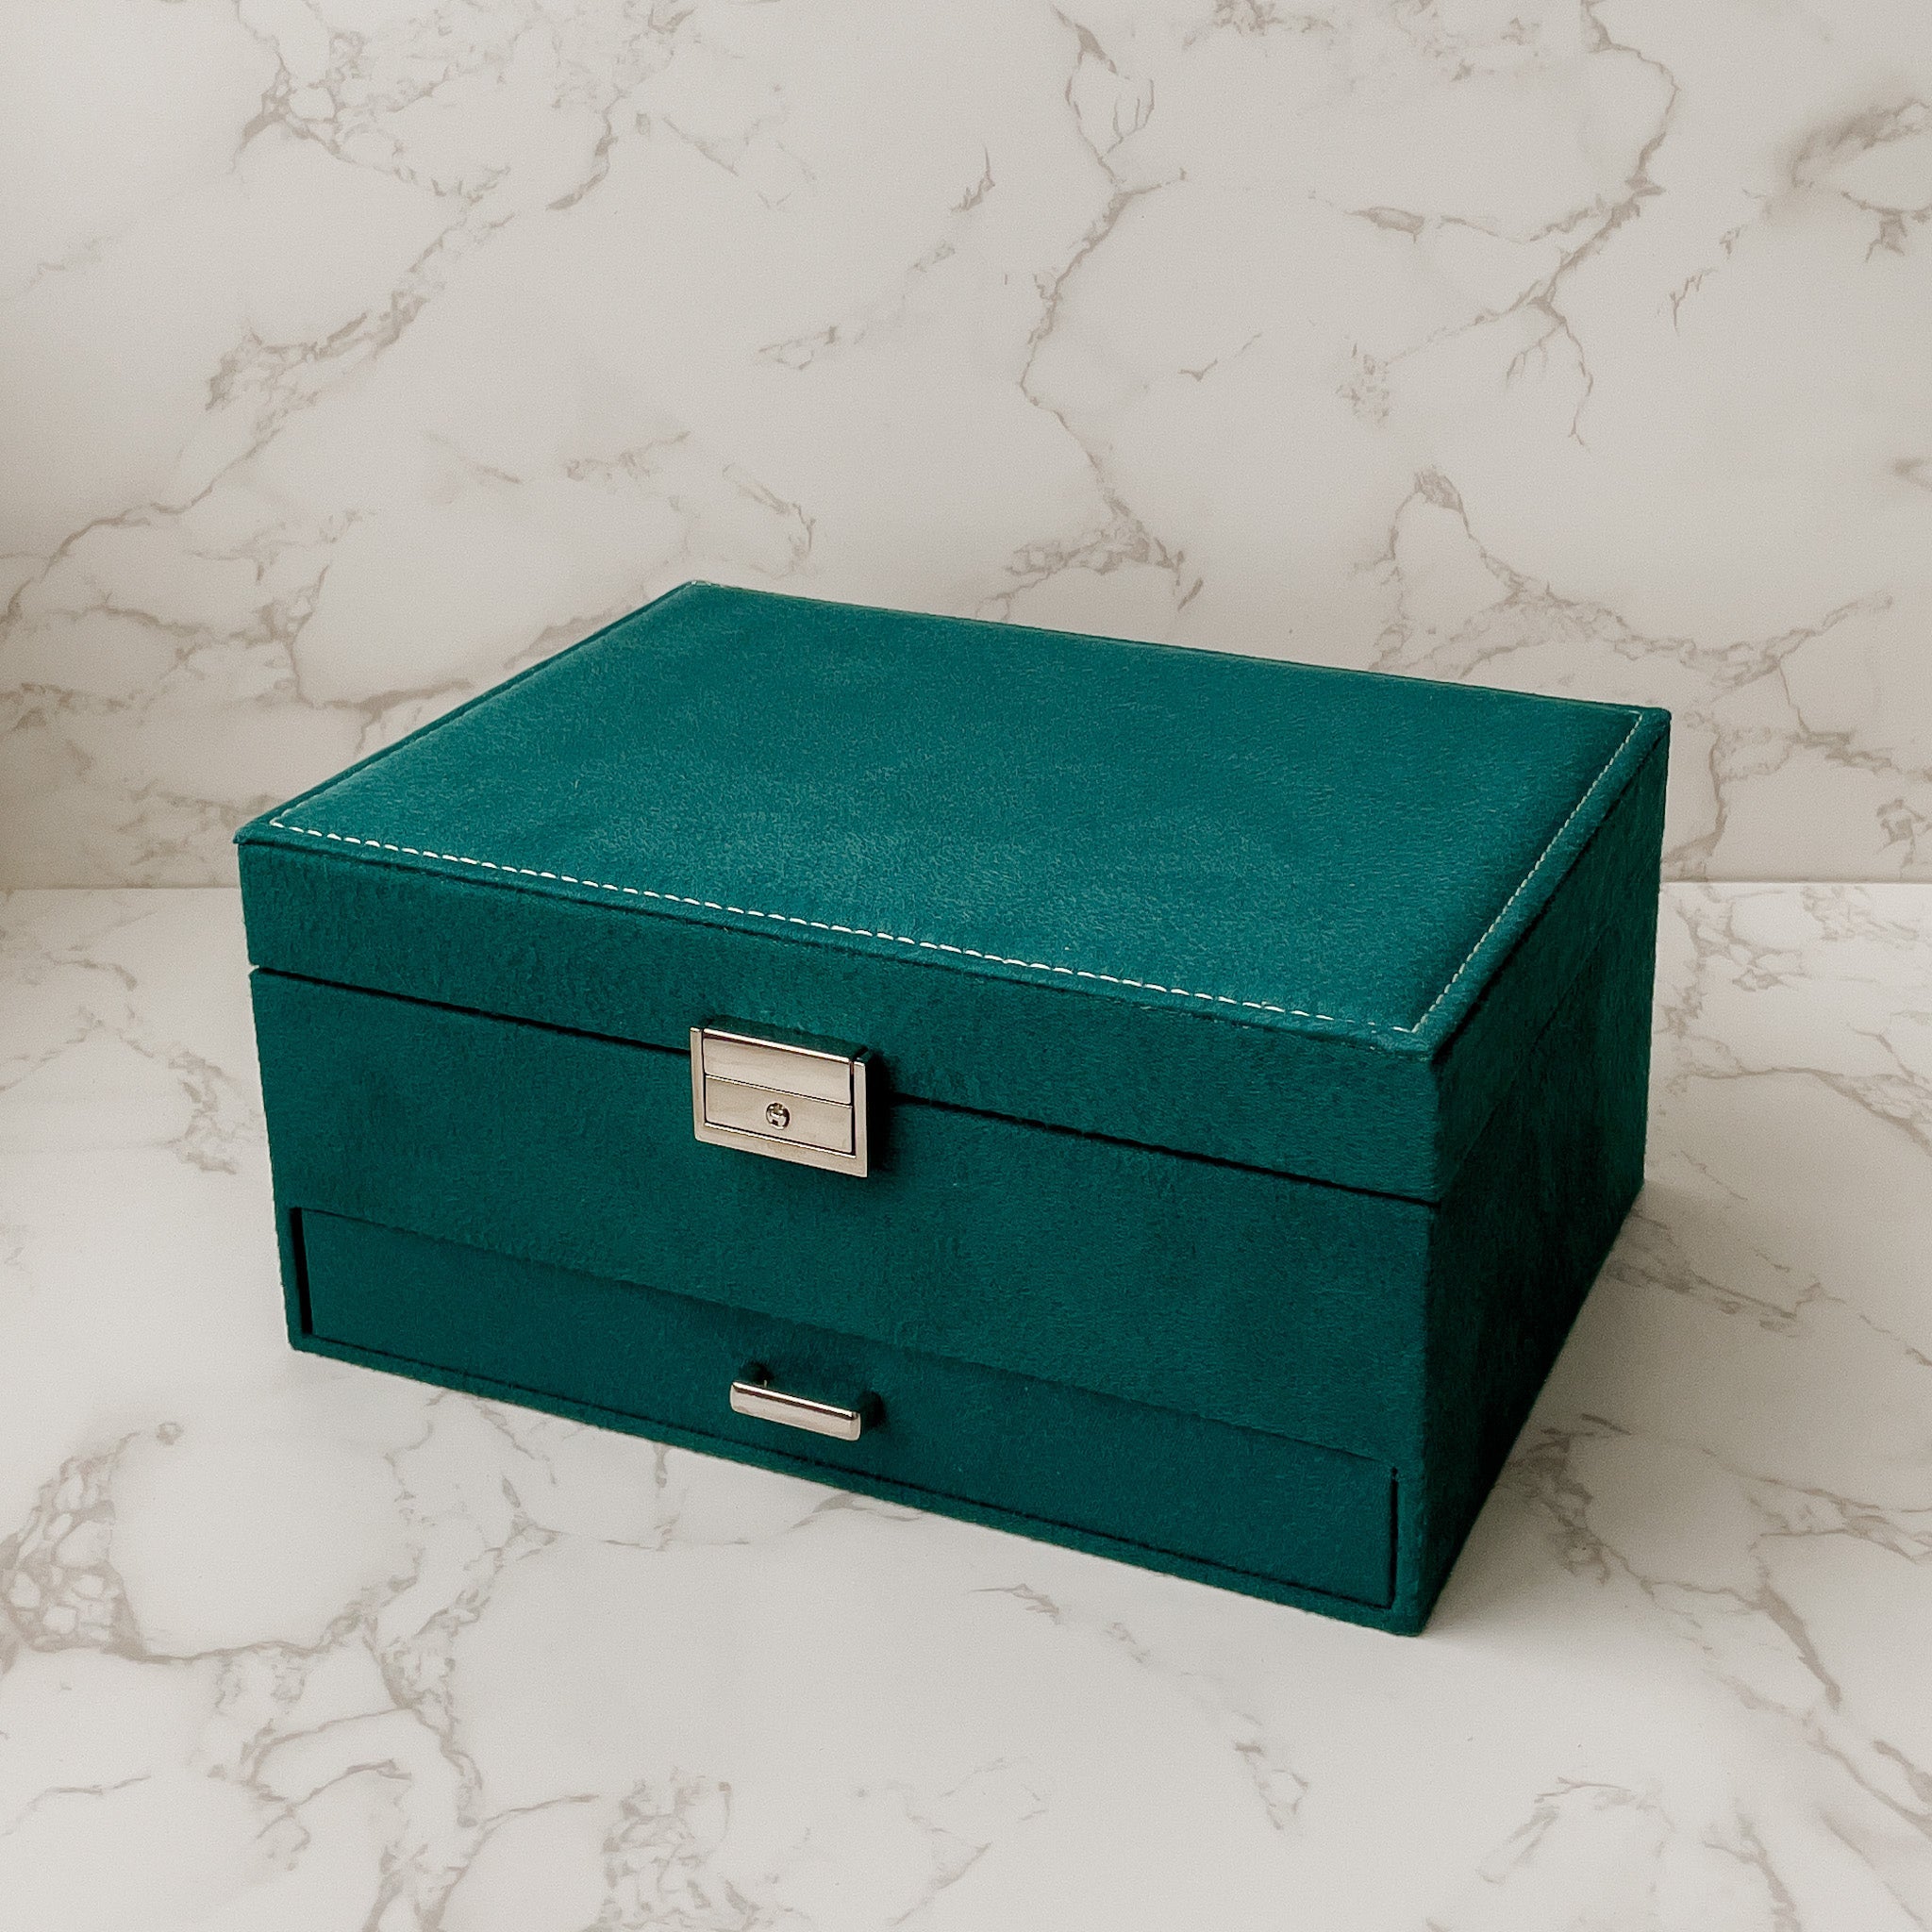 Jewelry box velvet green - BINS AND BOXES